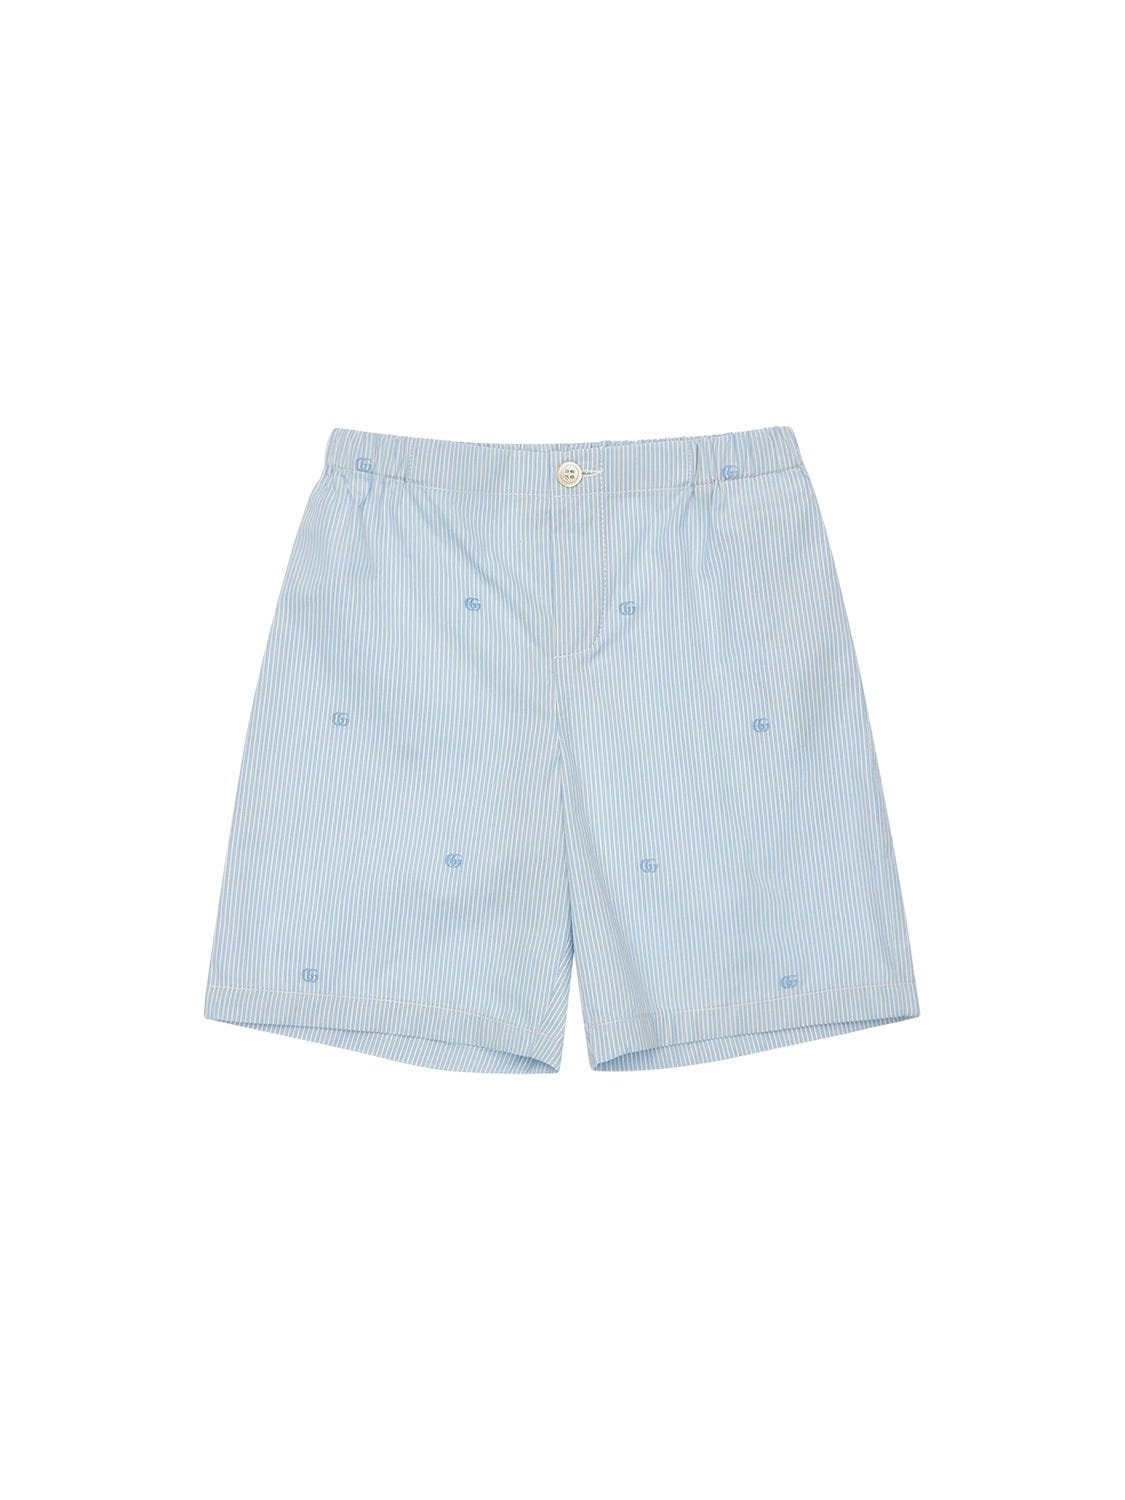 Gucci Kids' Gg Striped Cotton Shorts In Light Blue